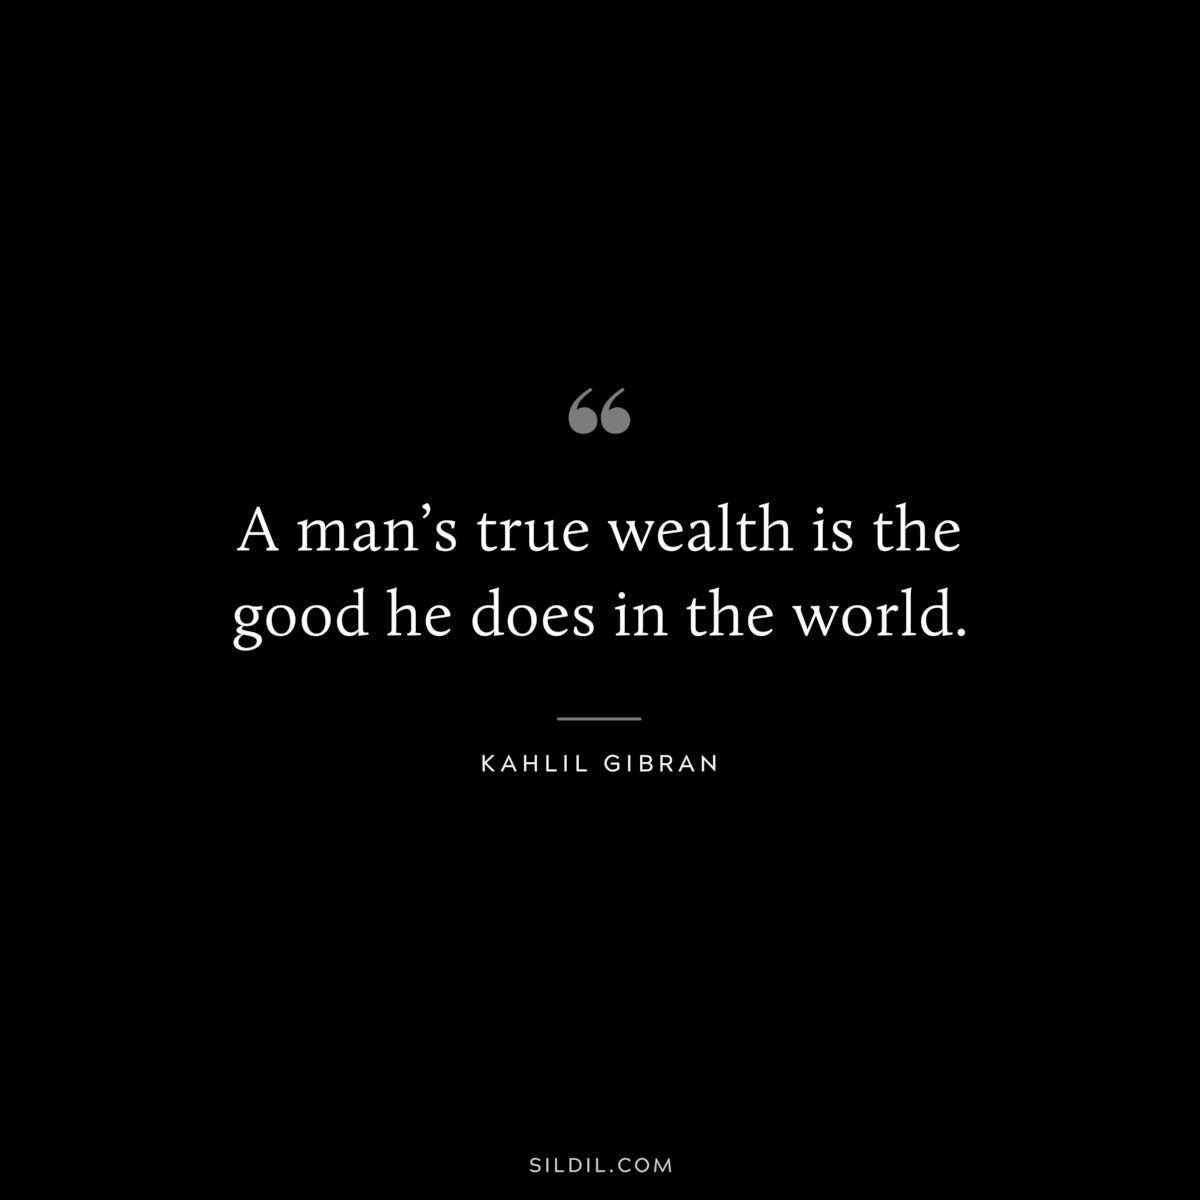 A man’s true wealth is the good he does in the world. ― Kahlil Gibran